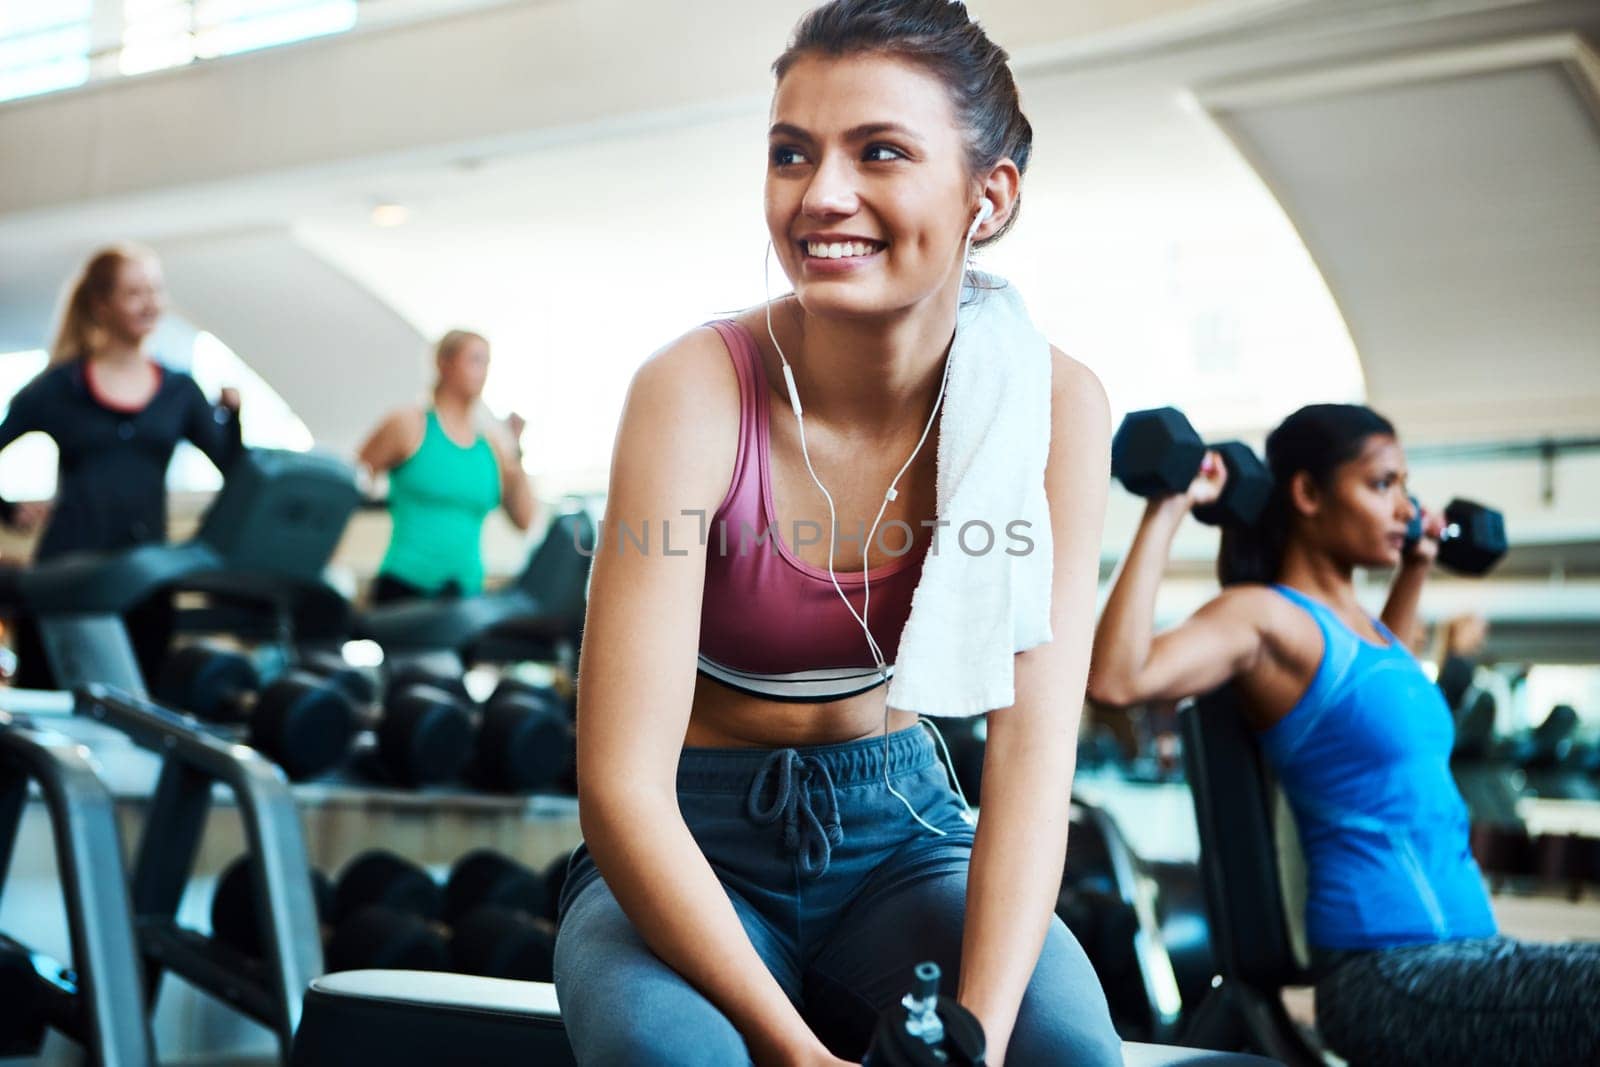 Now shes ready for a workout. an attractive young woman taking a break from her workout in the gym. by YuriArcurs